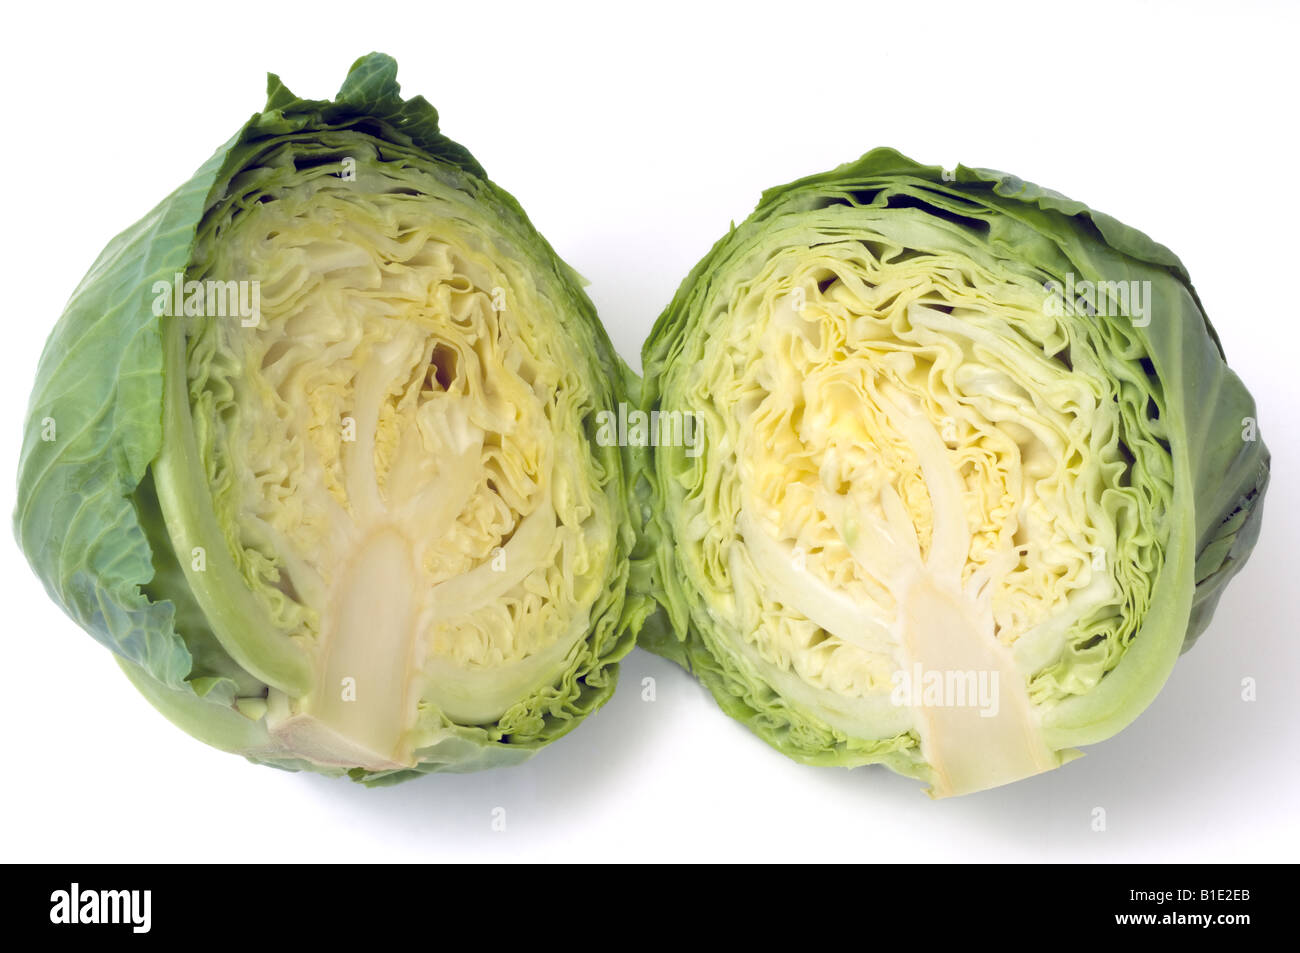 Green cabbage cut in half Stock Photo